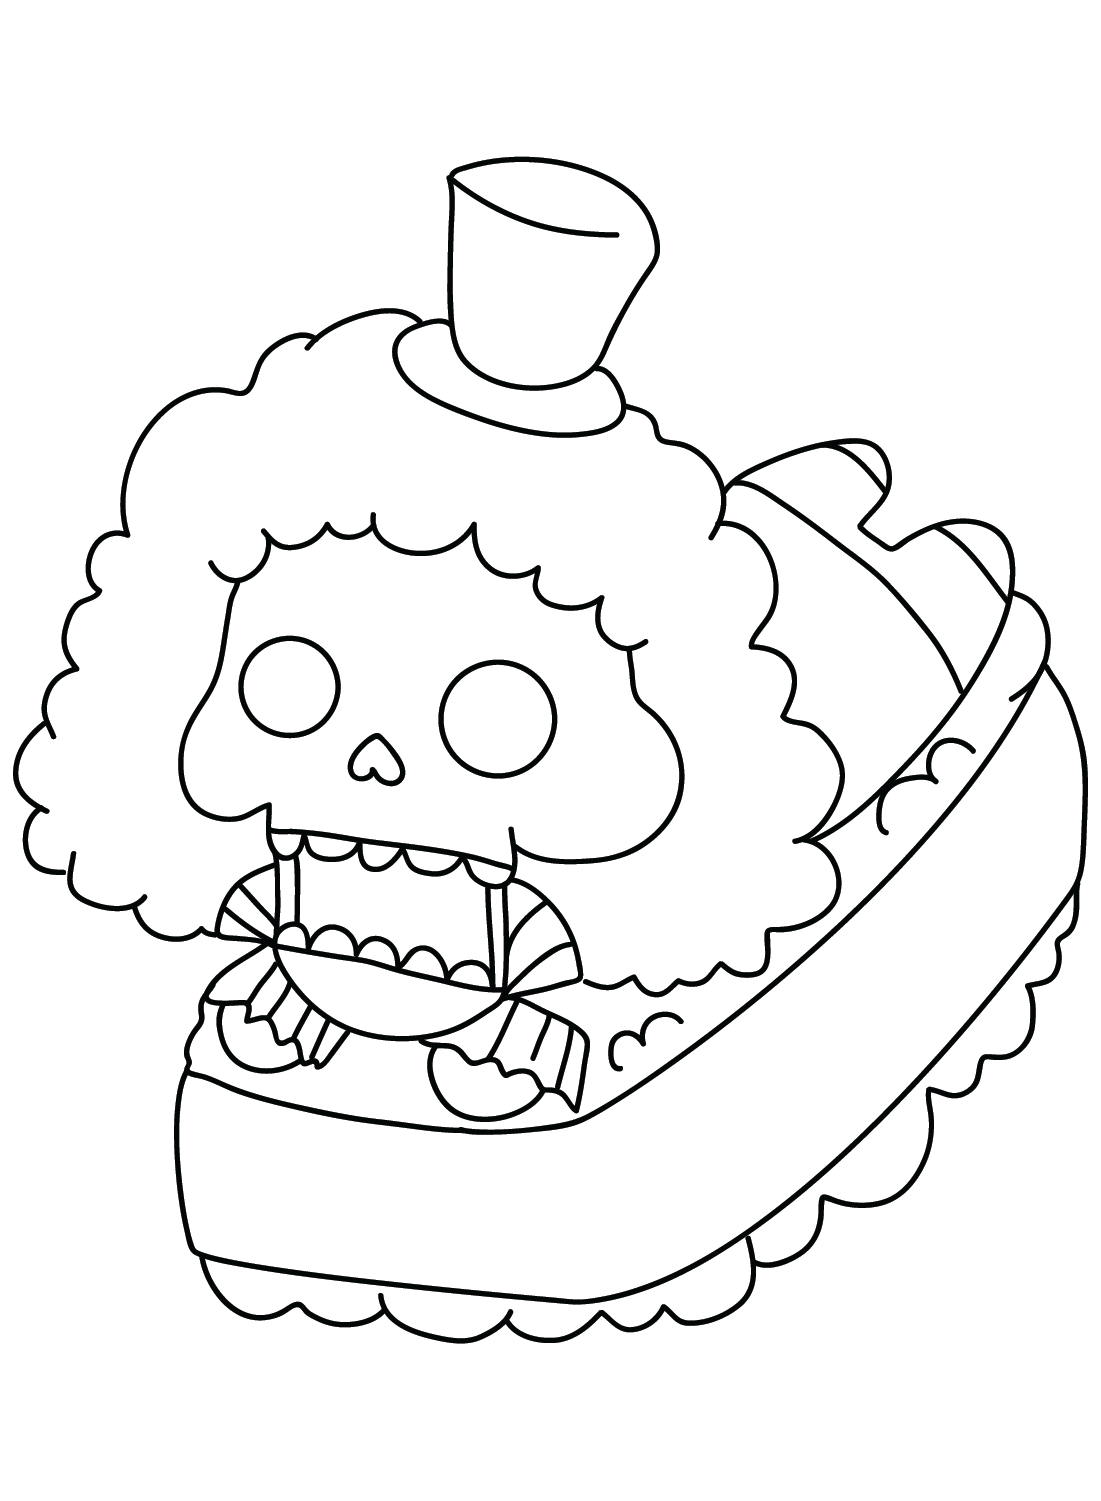 Sushi Brook Coloring Page from Brook